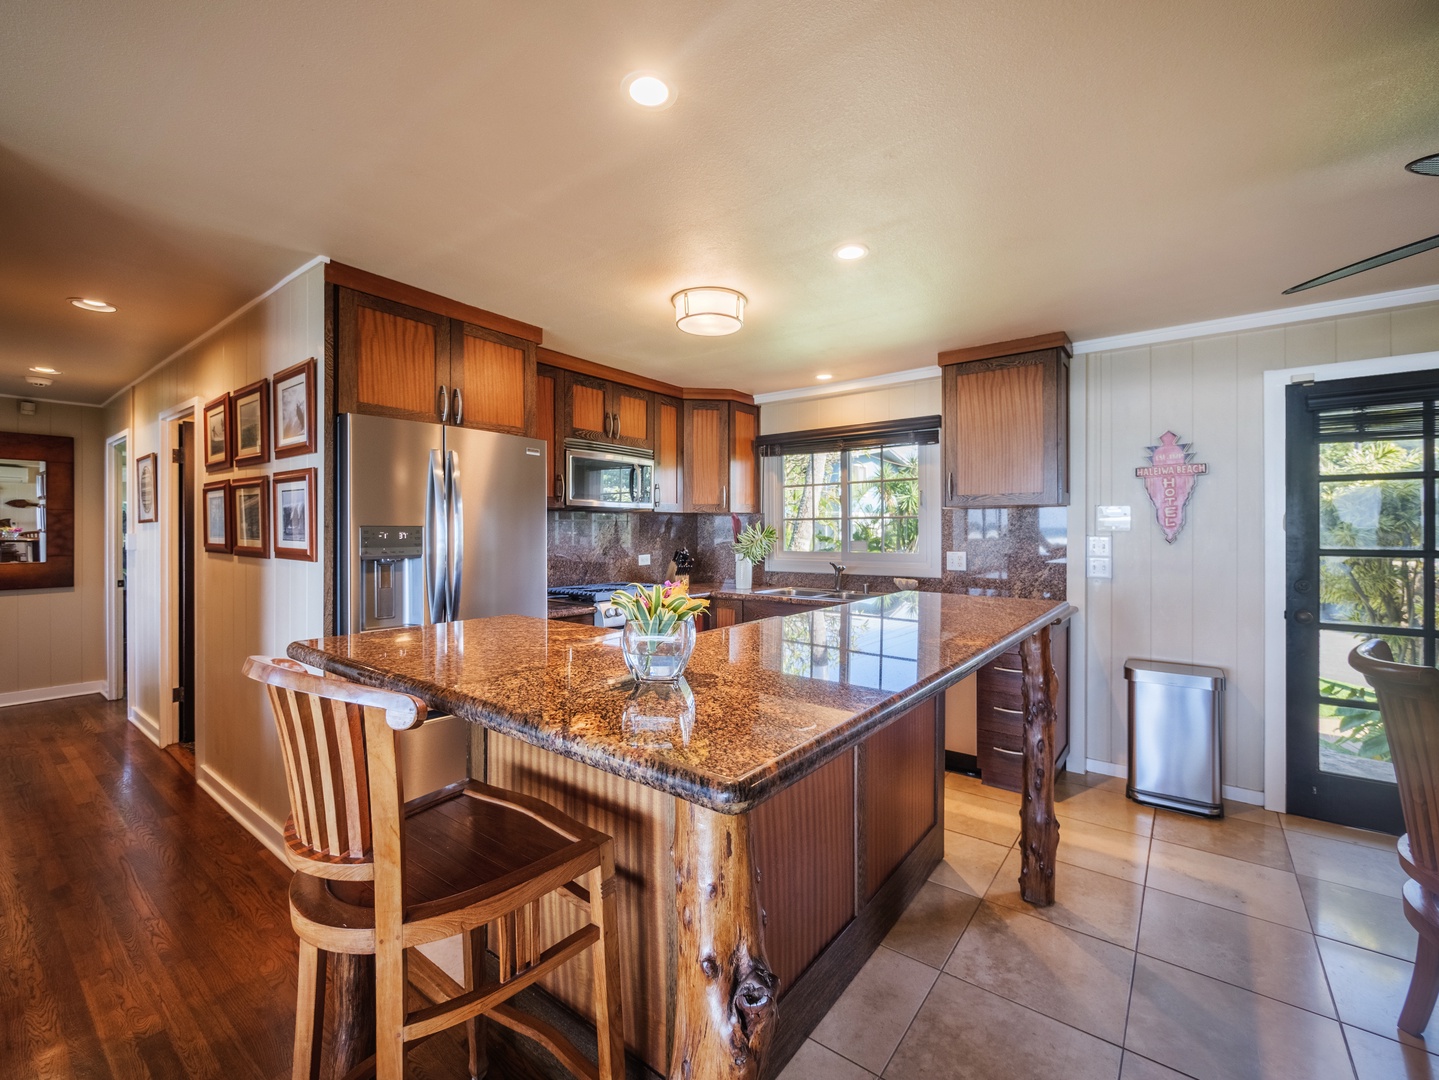 Haleiwa Vacation Rentals, Sunset Point Hawaiian Beachfront** - Fully-stocked kitchen with a breakfast bar for quick meals.